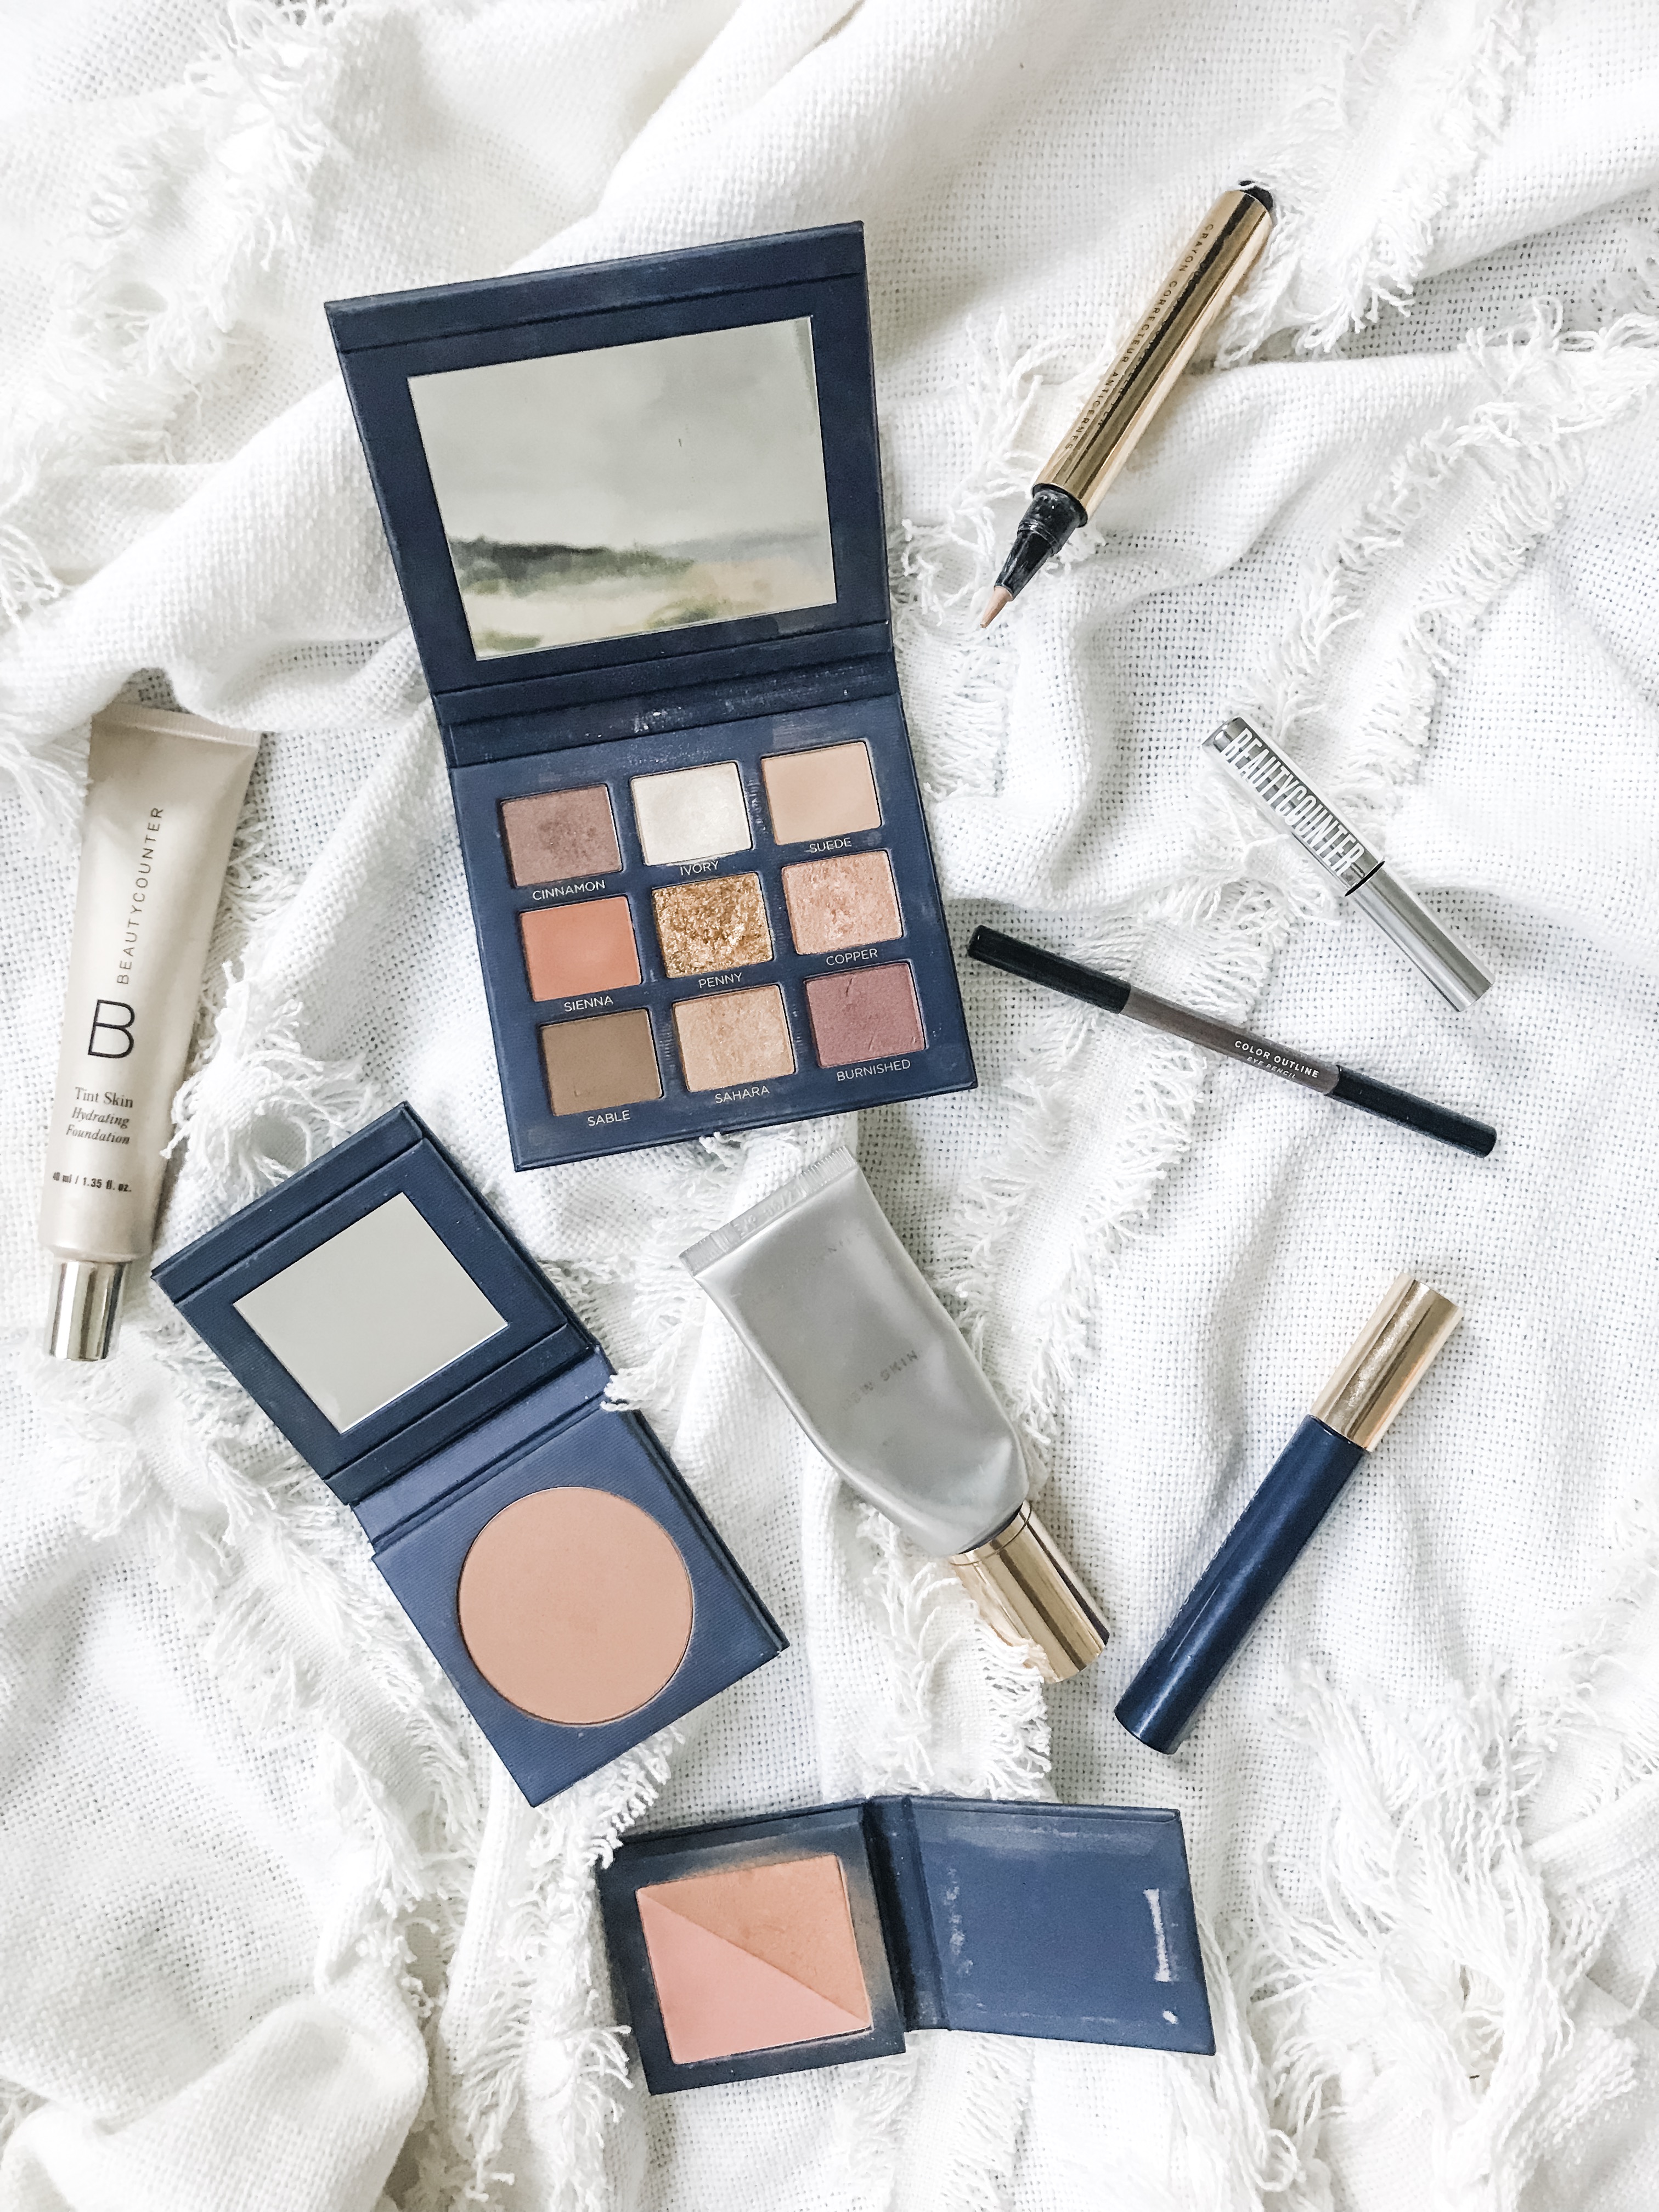 why clean beauty matters. nontoxic personal care products. Choosing safer beauty products. Beautycounter lipstick. Eye shadow palette. Makeup collection. Makeup favorites. 